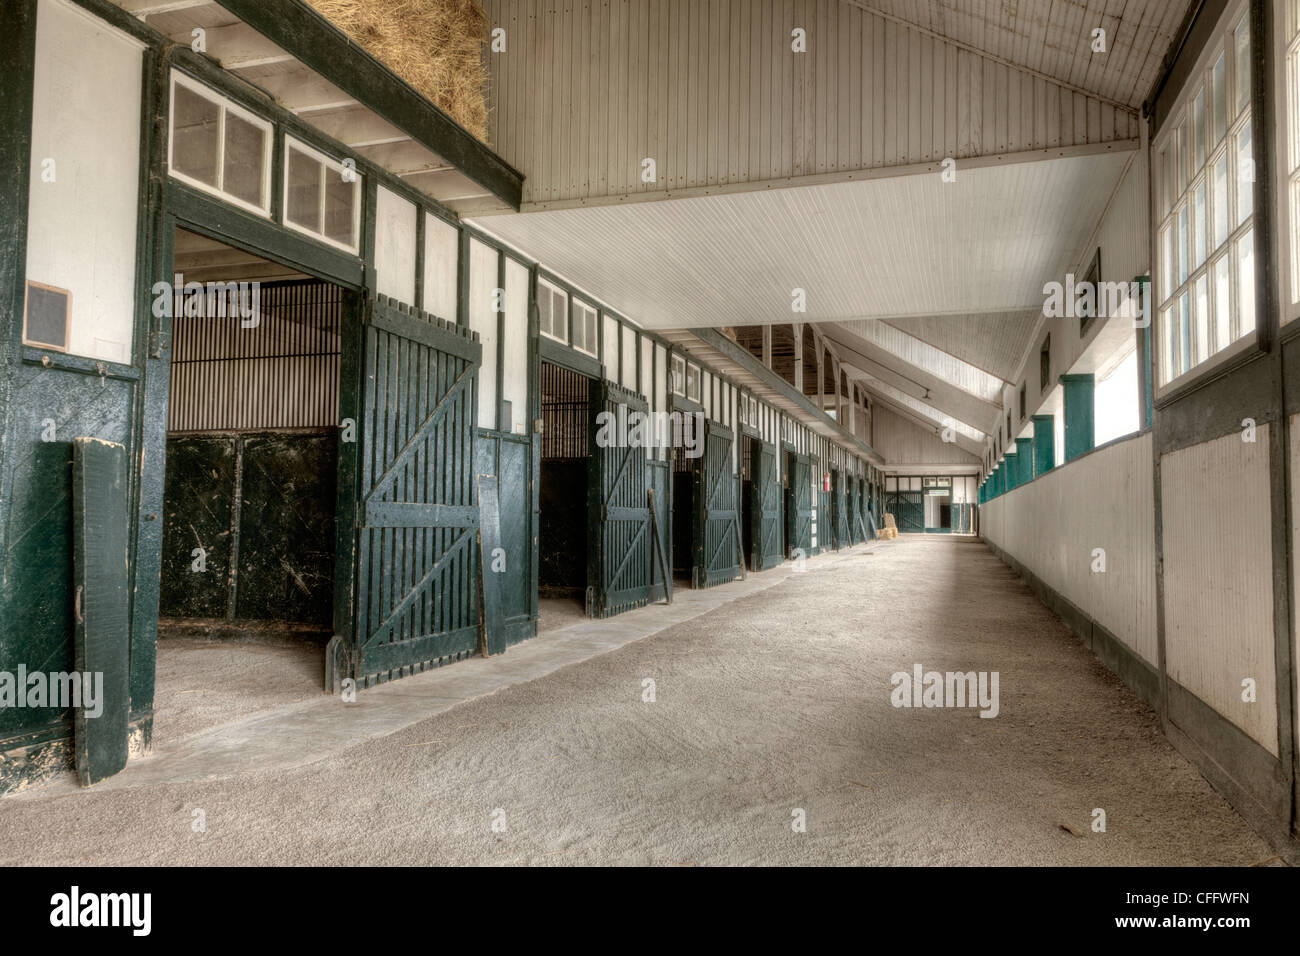 Horse stables Stock Photo